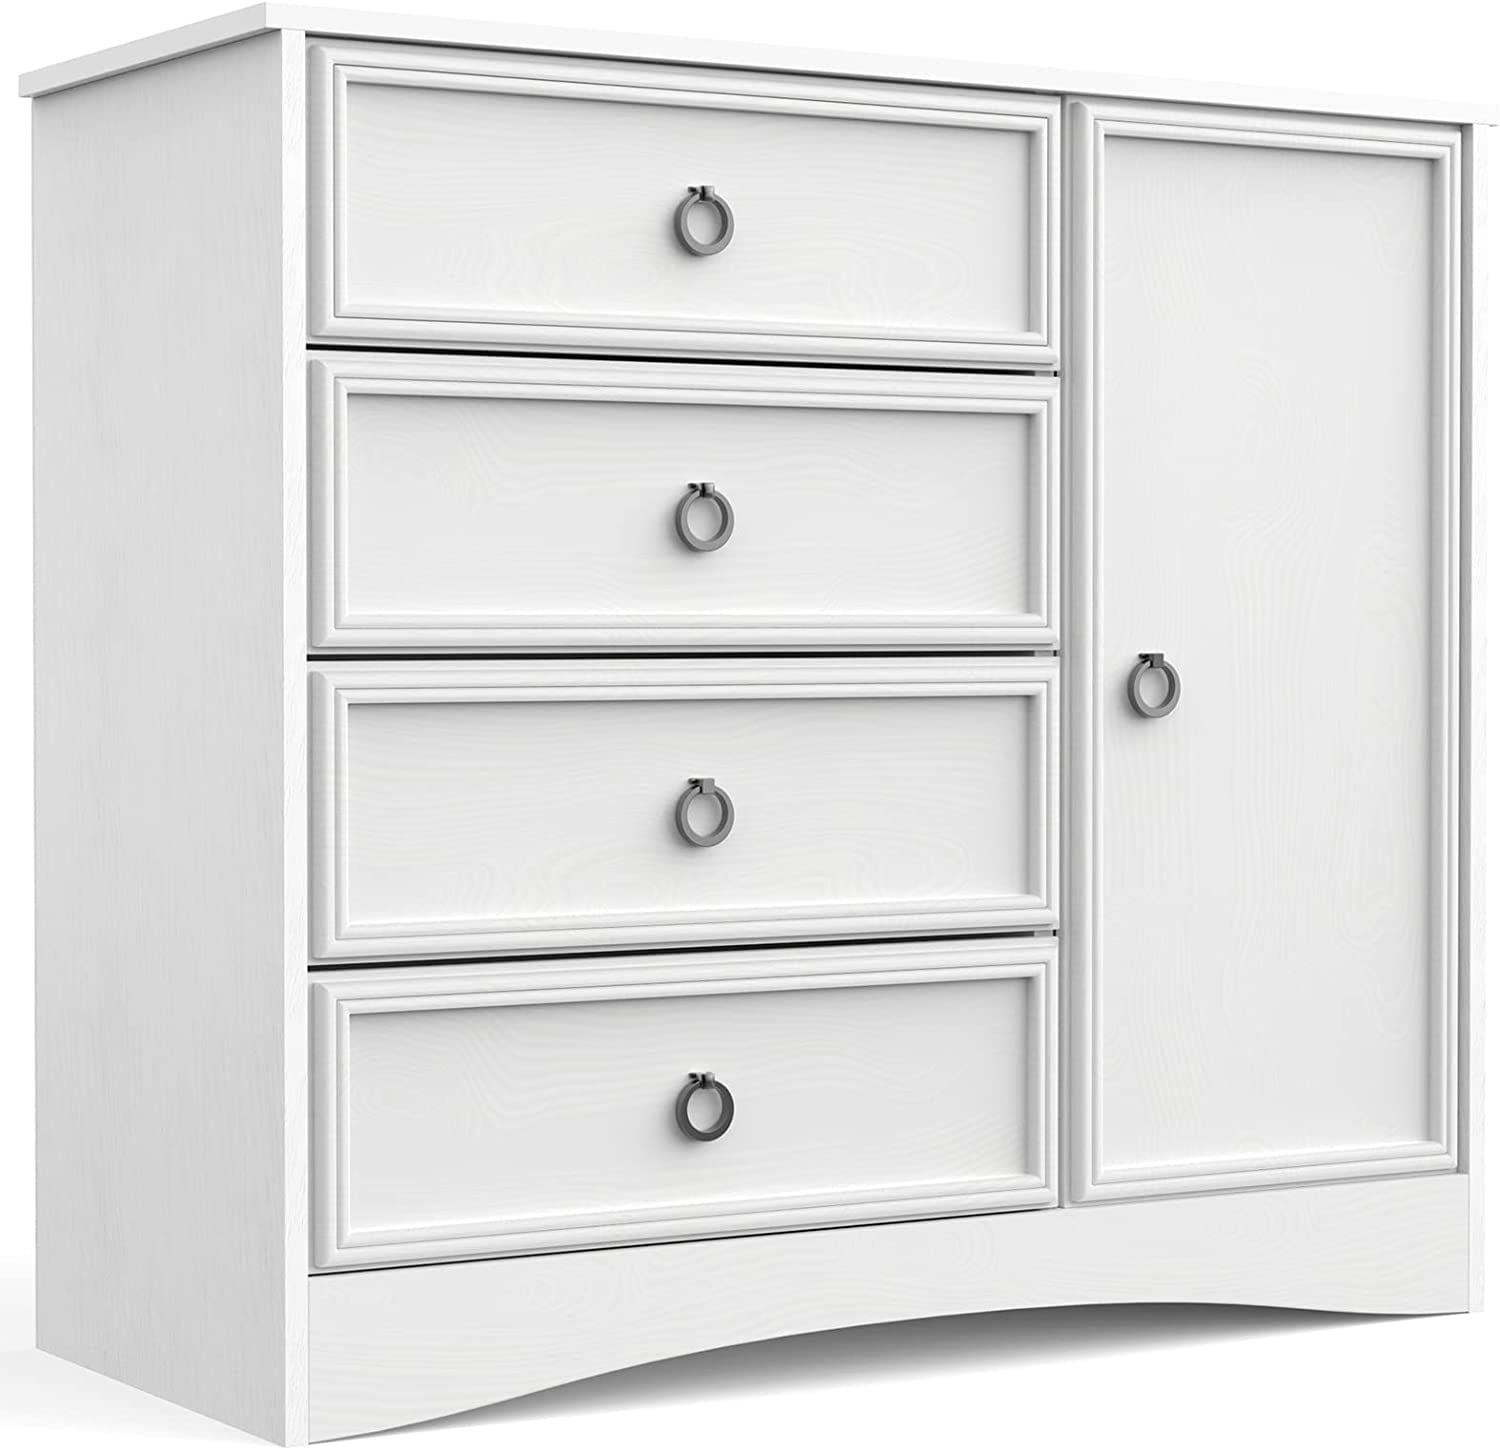 LUMTOK 4-Drawers Dresser with 3 Open Storage Shelves, Fabric Dressers  Drawers for Bedroom, Hallway, Nursery, Closets (White)